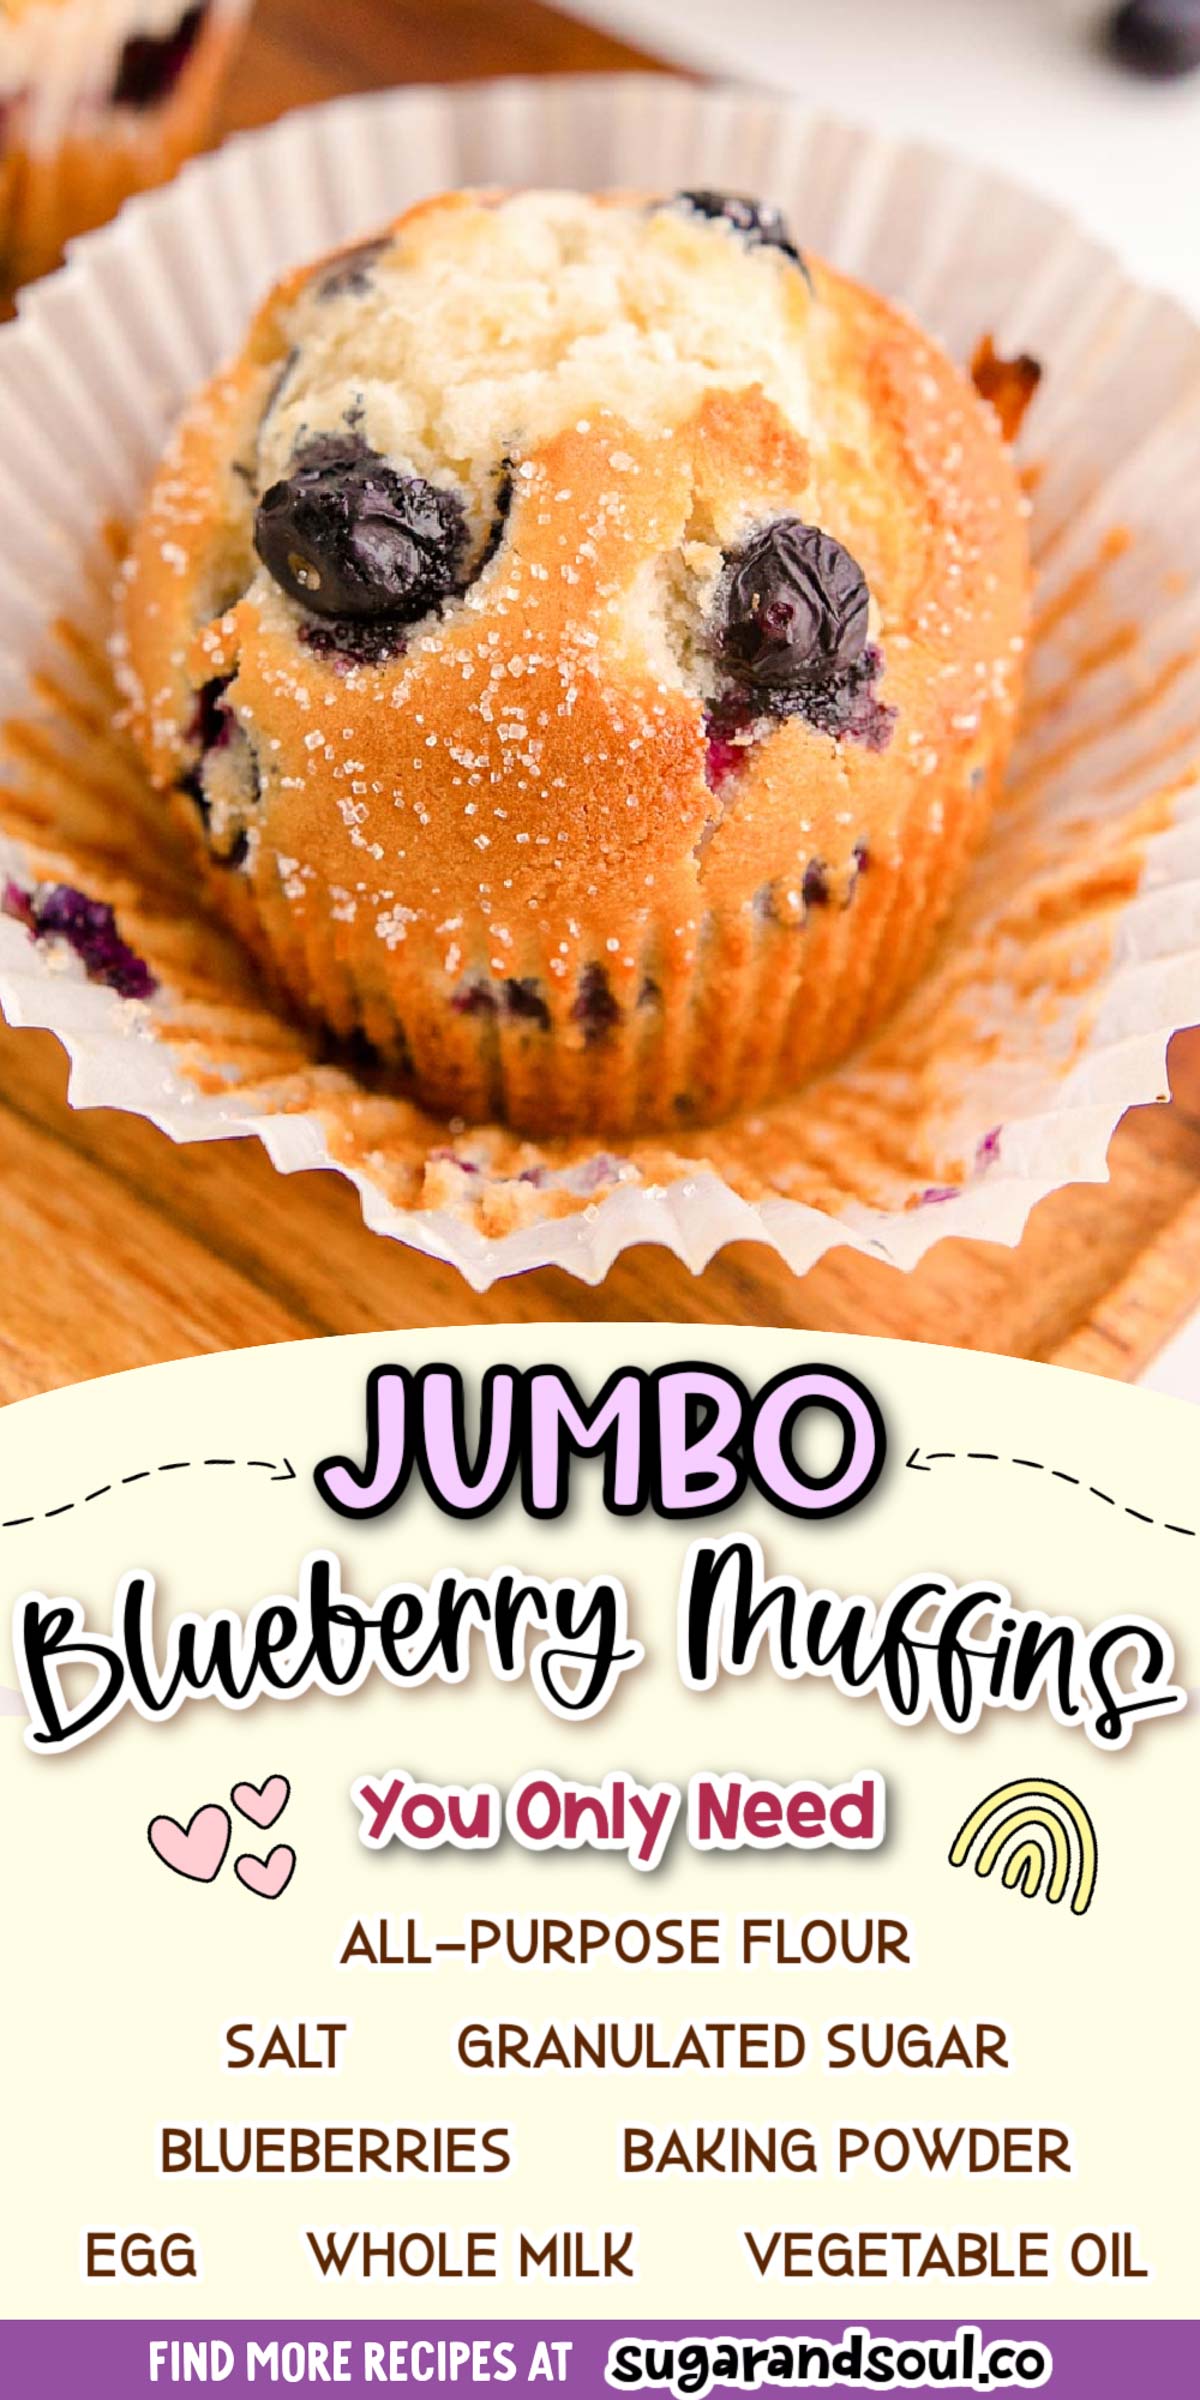 Jumbo Blueberry Muffins combines pantry staple ingredients with juicy blueberries to bring you big soft, fluffy muffins in just 35 minutes! The perfect breakfast or mid-day snack! via @sugarandsoulco